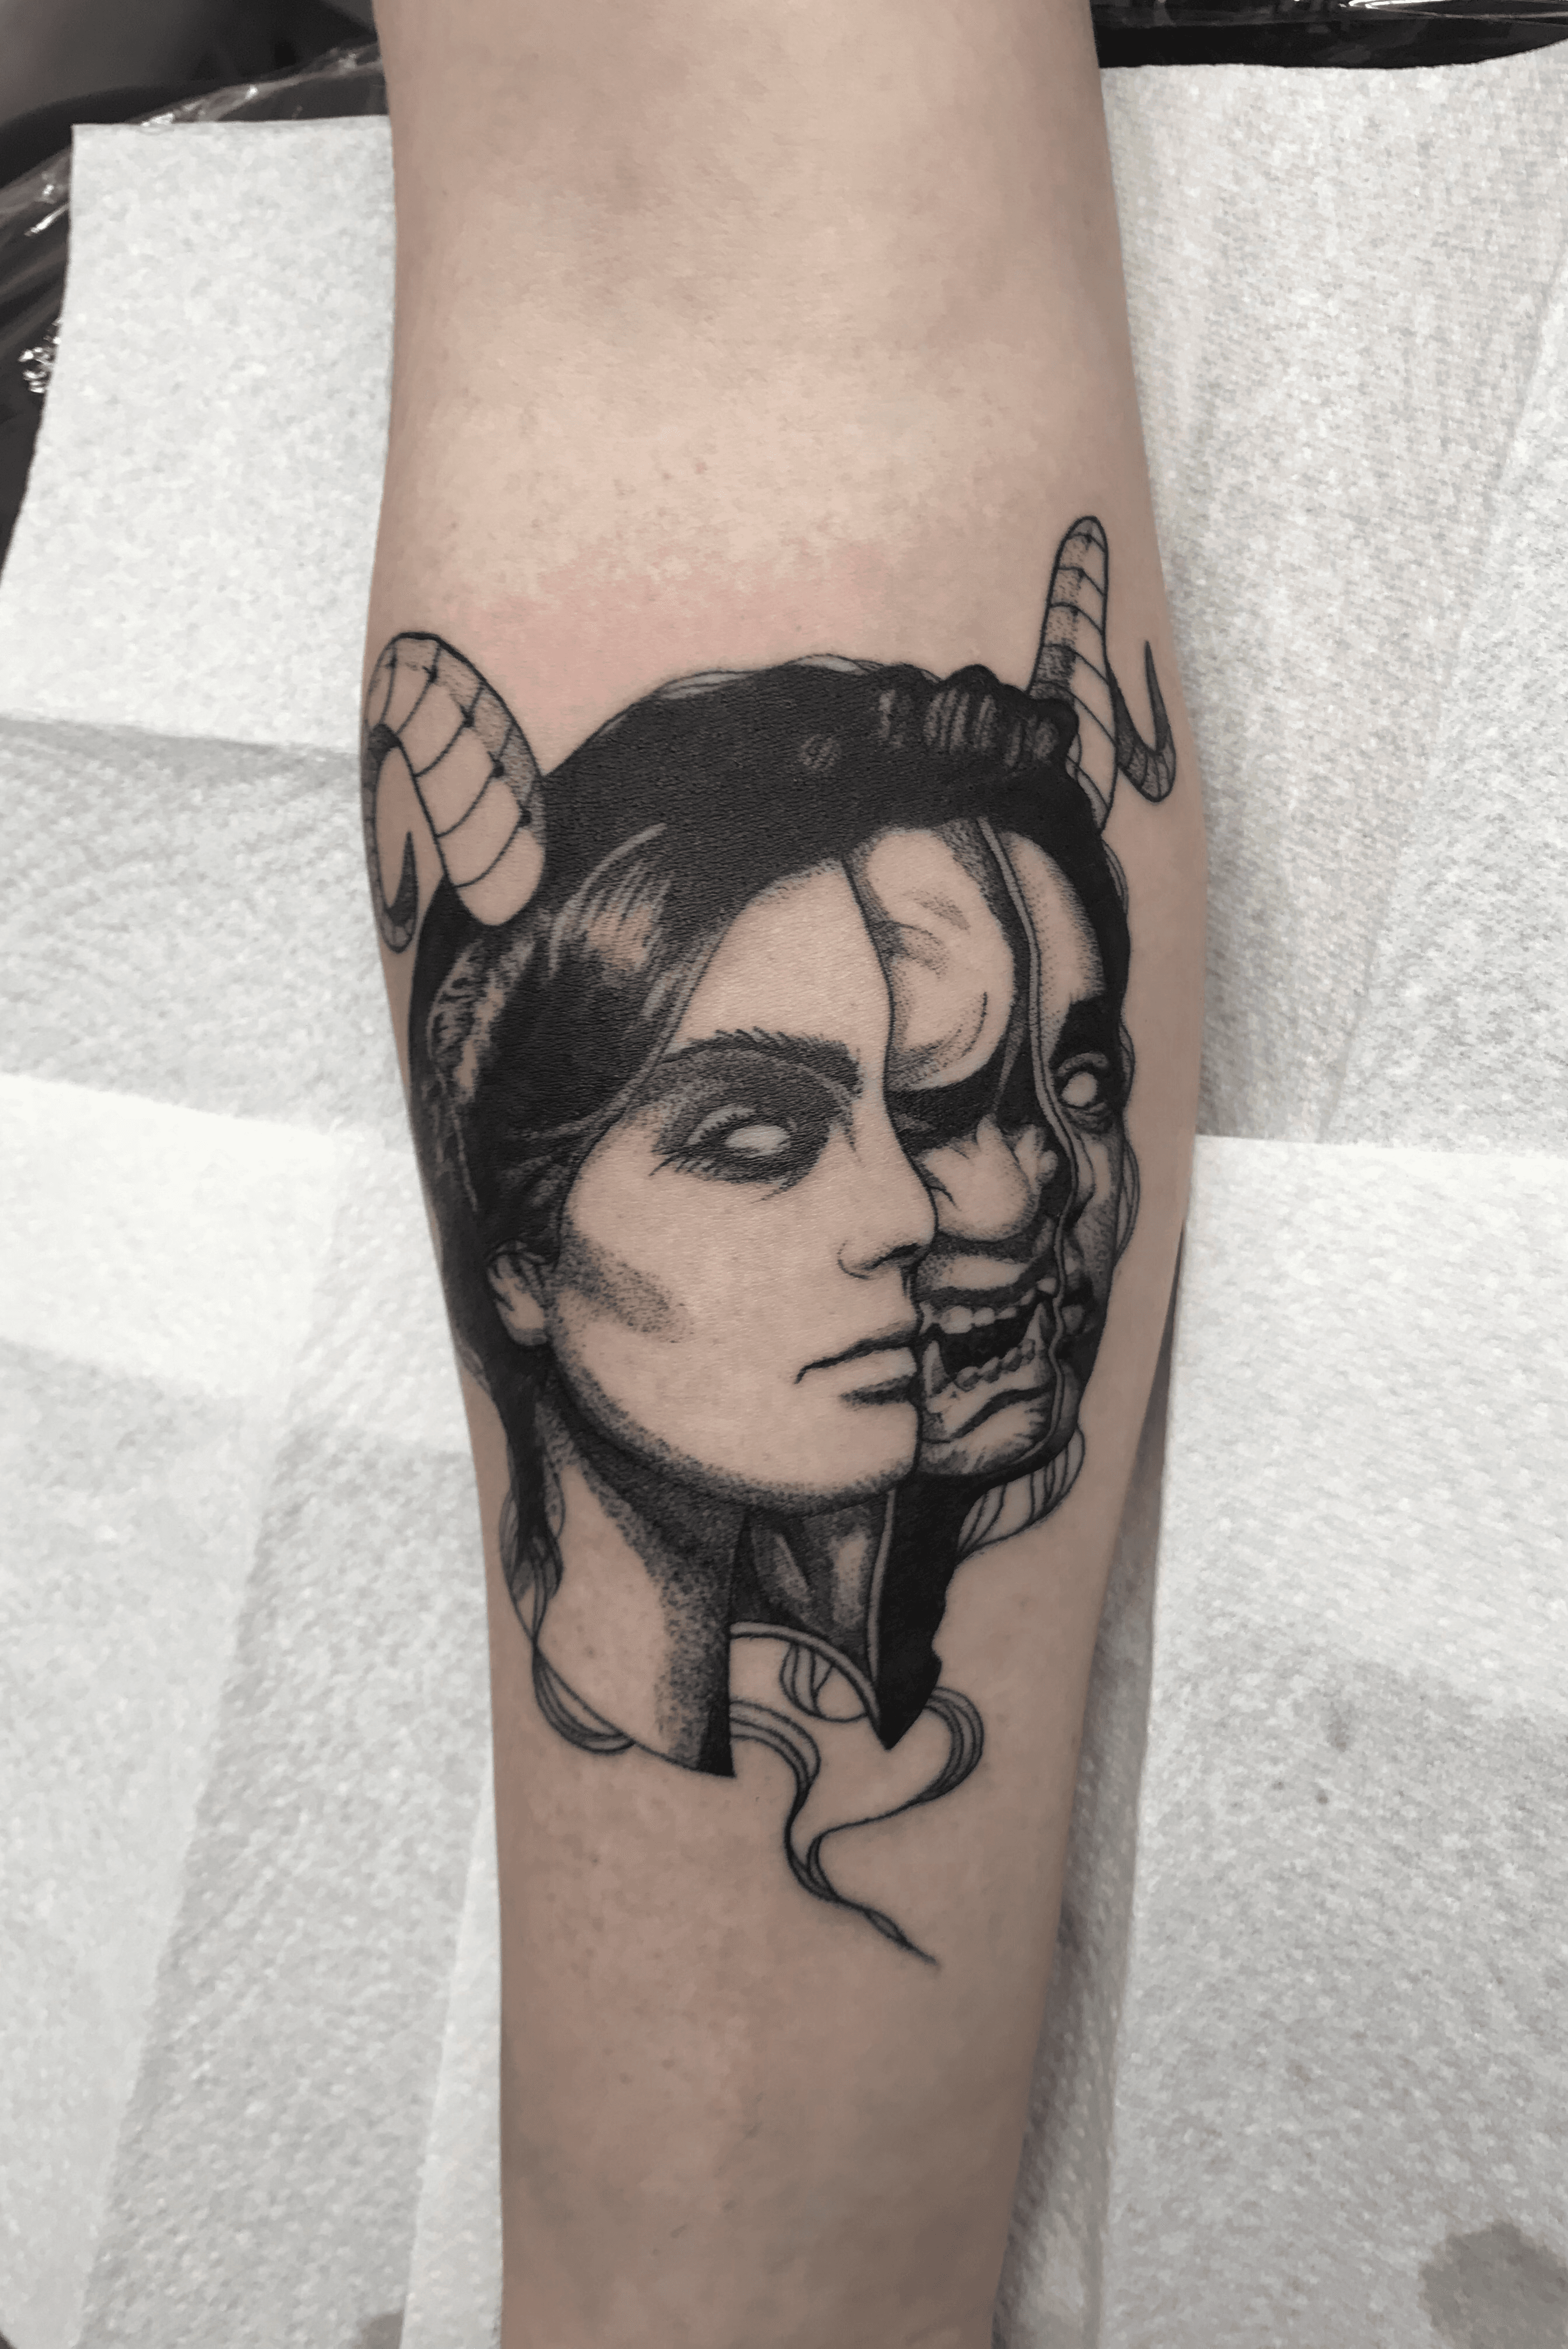 Woman two for face tattoo 27 Ambigram